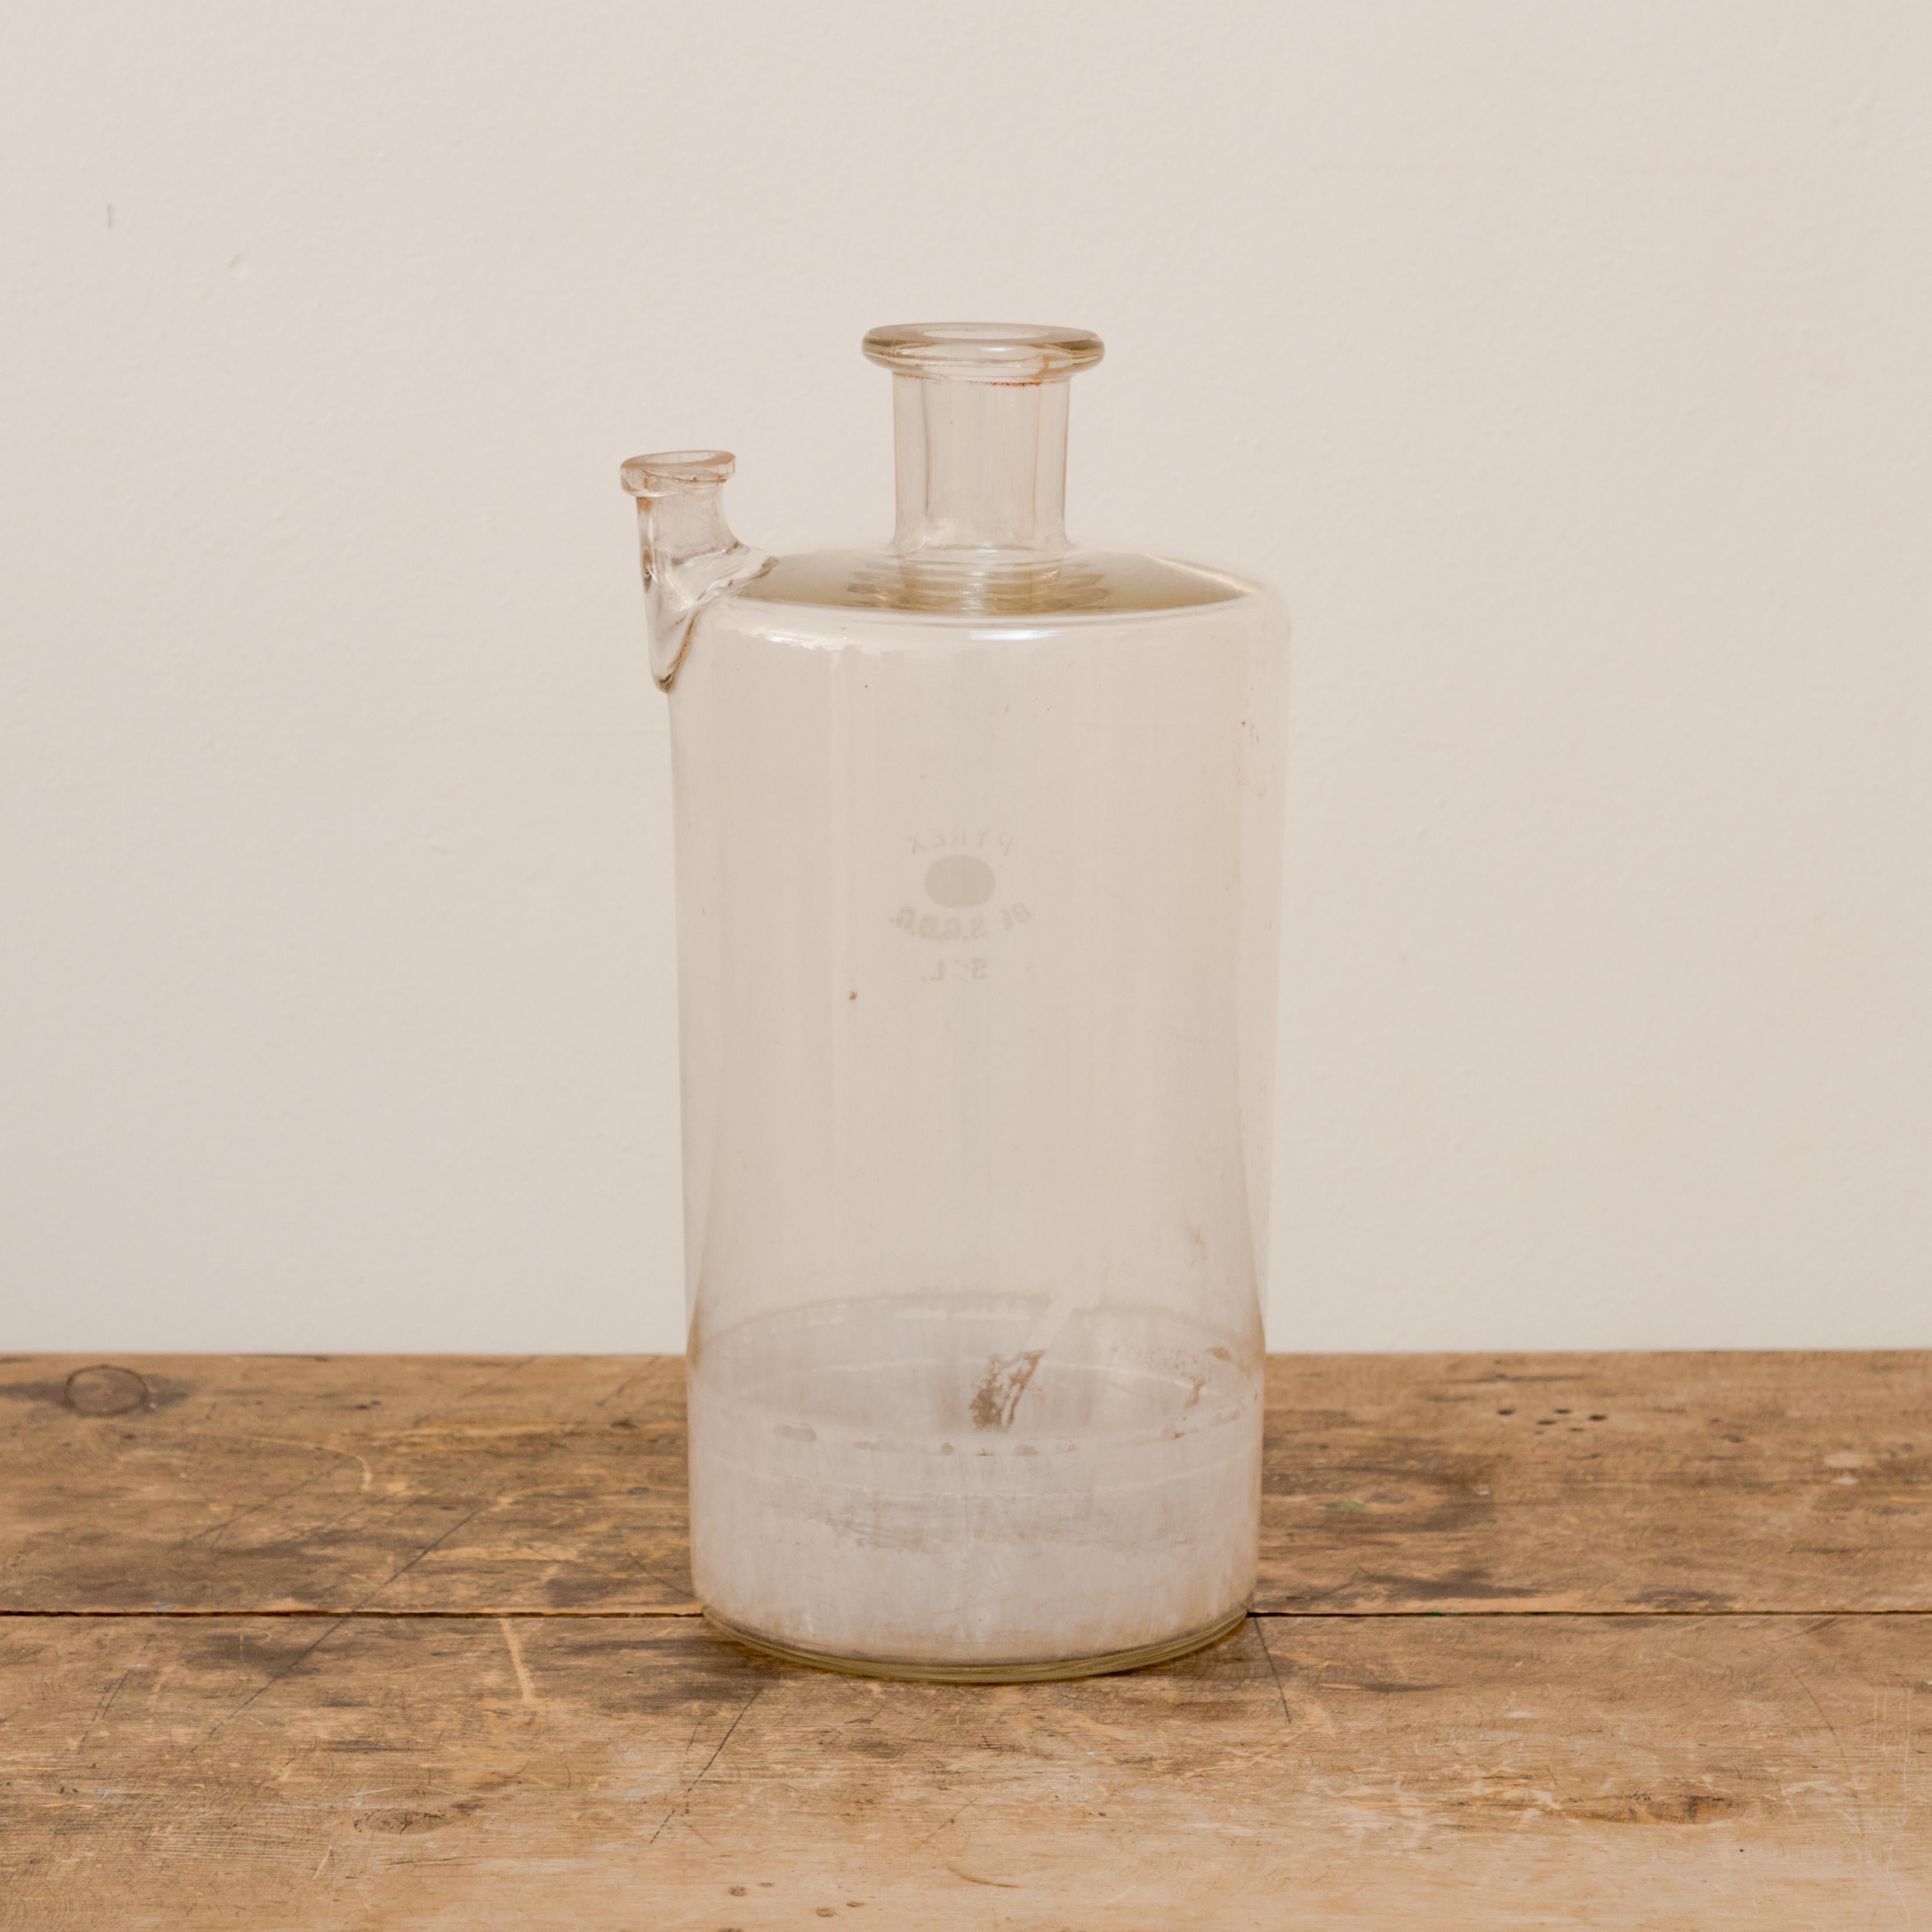 Cylindrical lab glass vessel with spout.